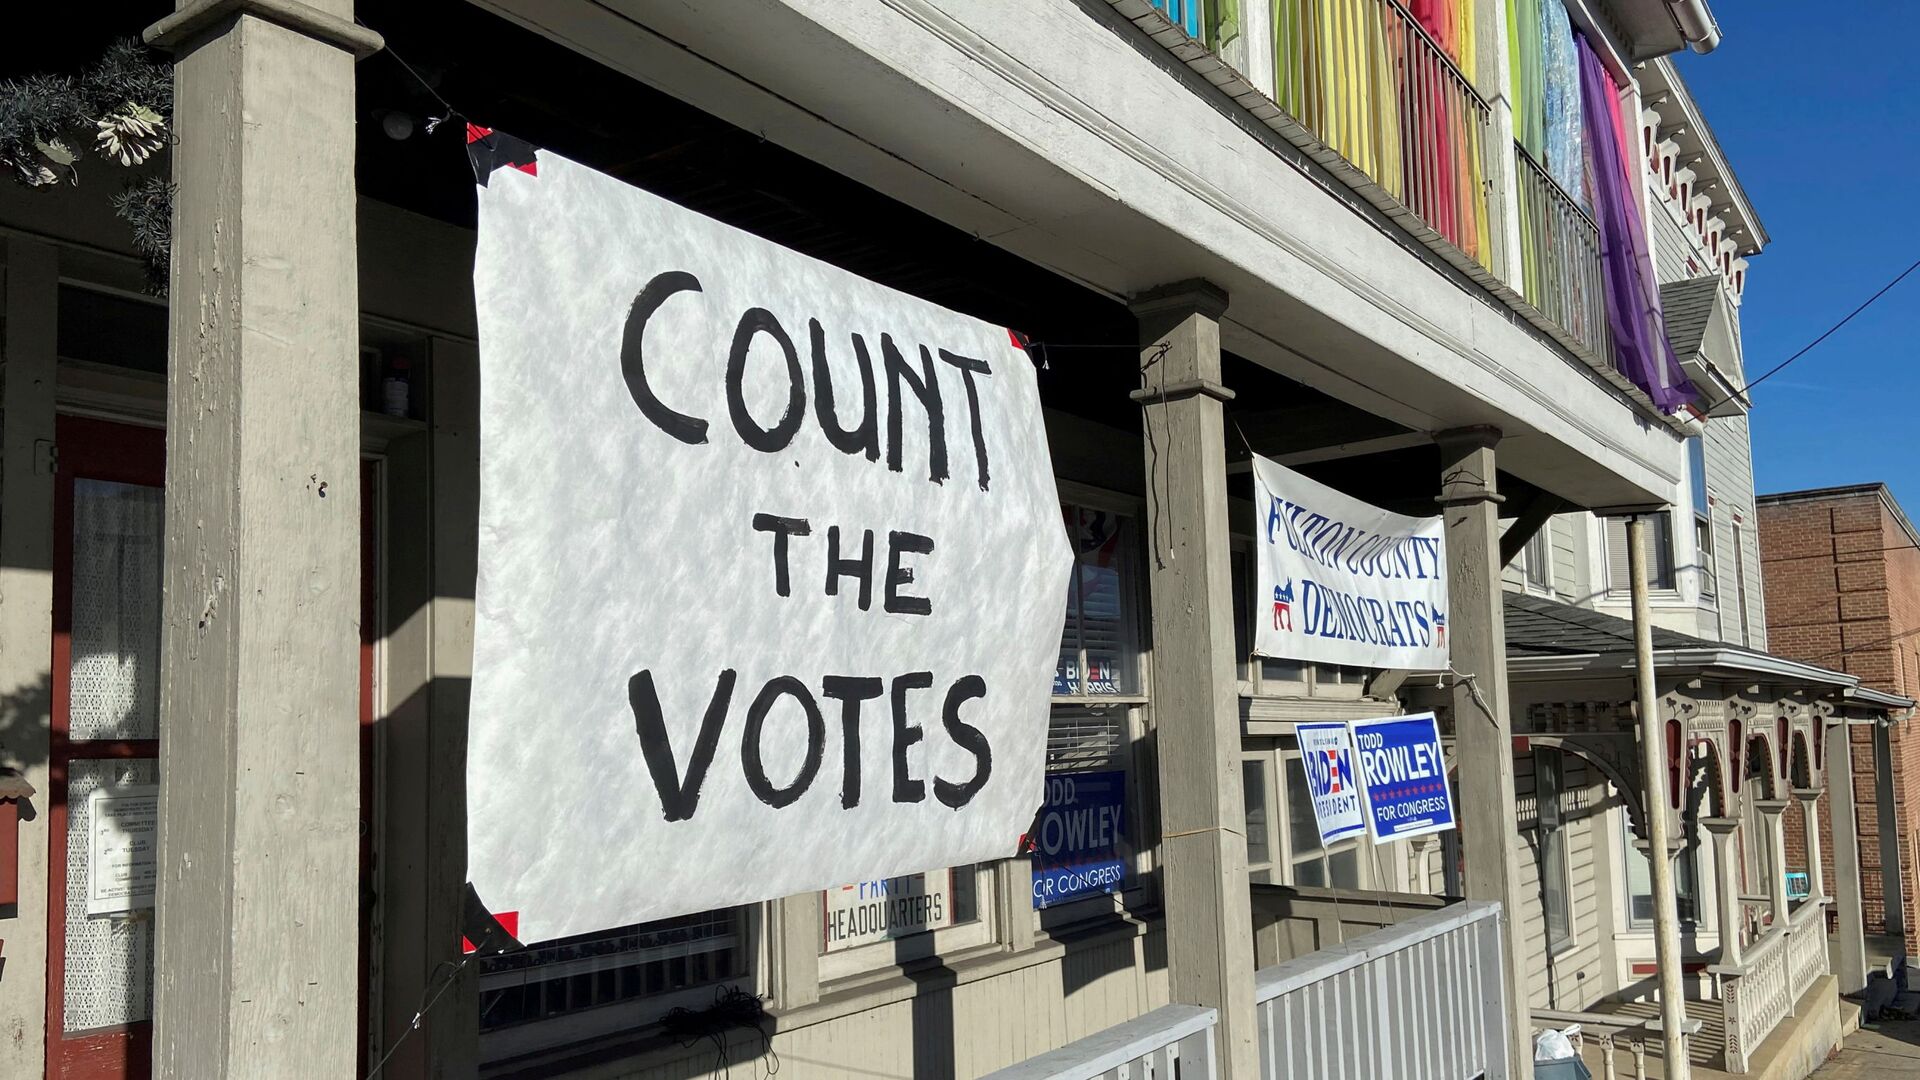 A sign urging people to vote is seen on the porch of the Democratic Party's Fulton County headquarters on Election Day in McConnellsburg, Pennsylvania November 3, 2020. Picture taken November 3, 2020. - Sputnik International, 1920, 25.08.2021